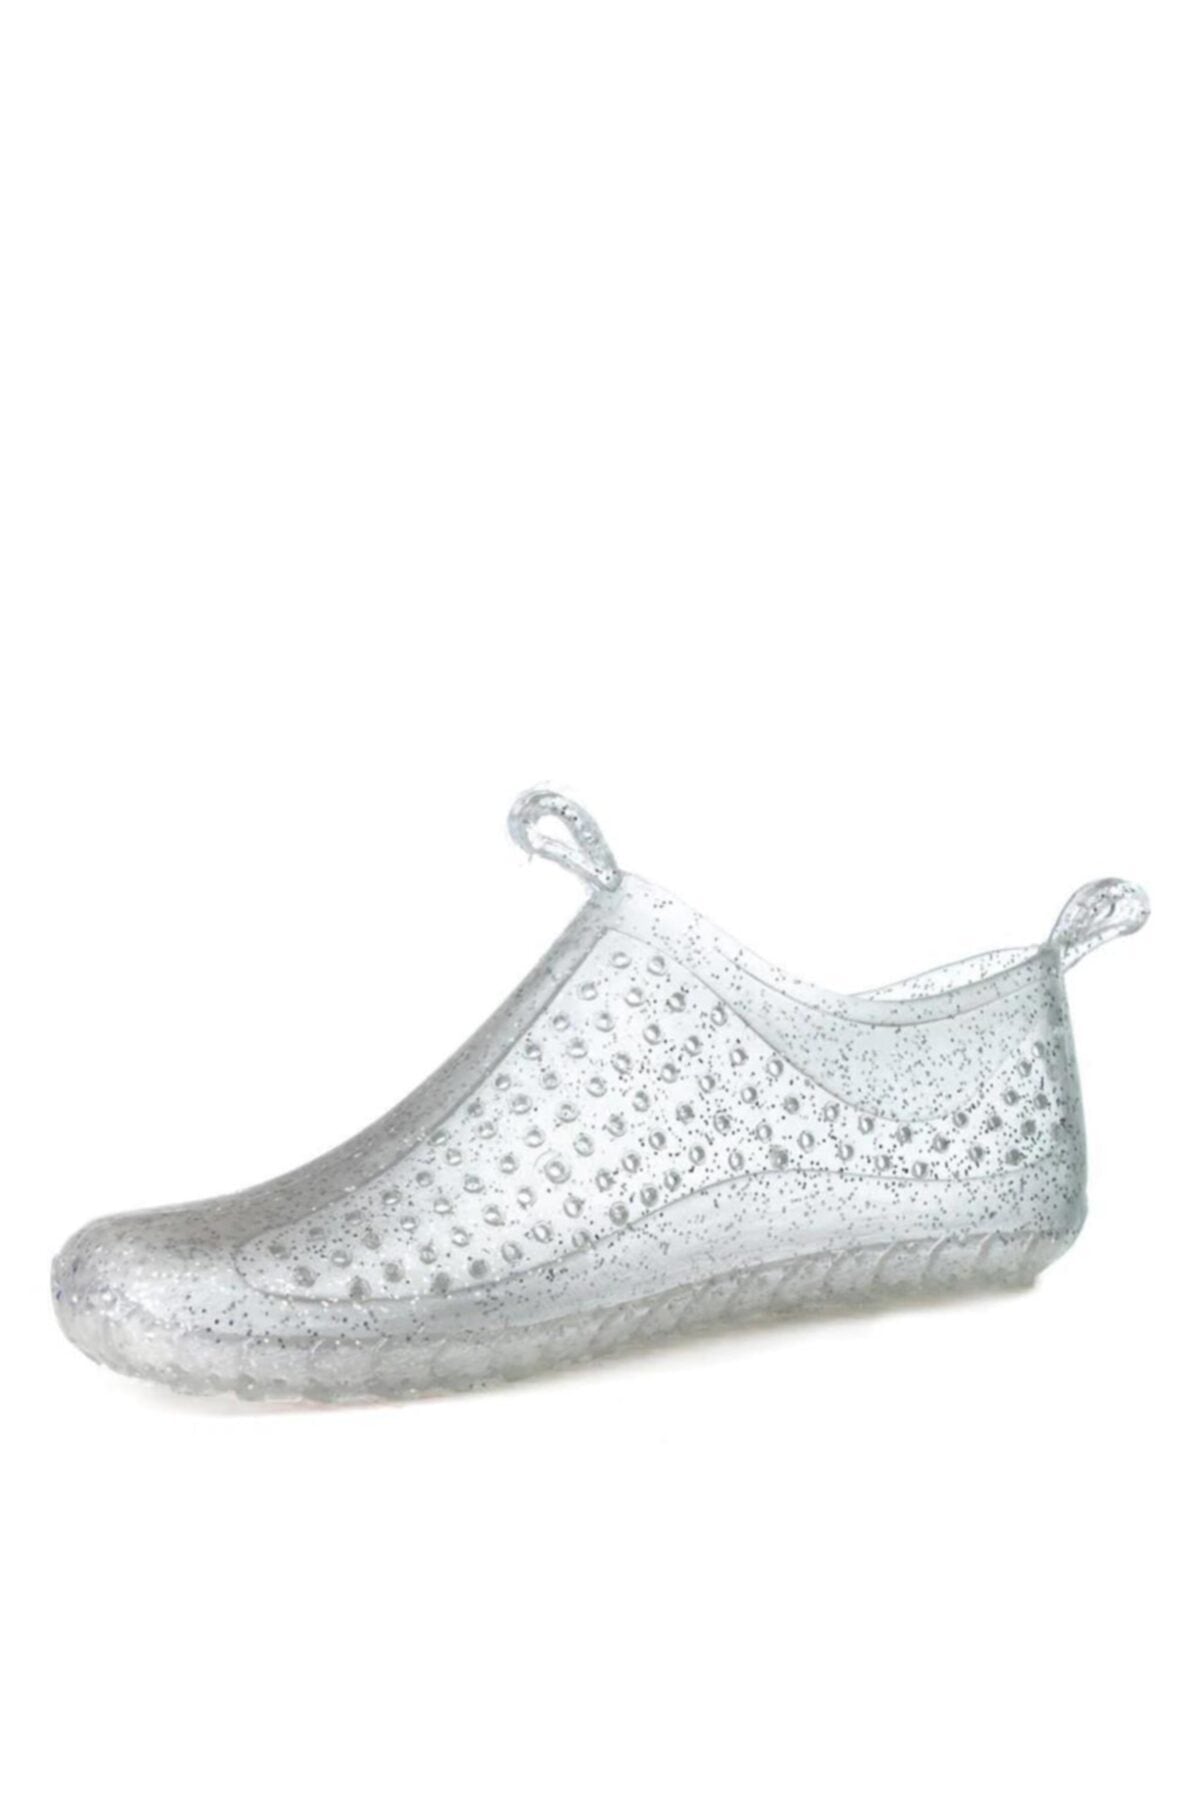 Unisex Transparent Silvery Sea Shoes Casual Stylish Sea Shoes